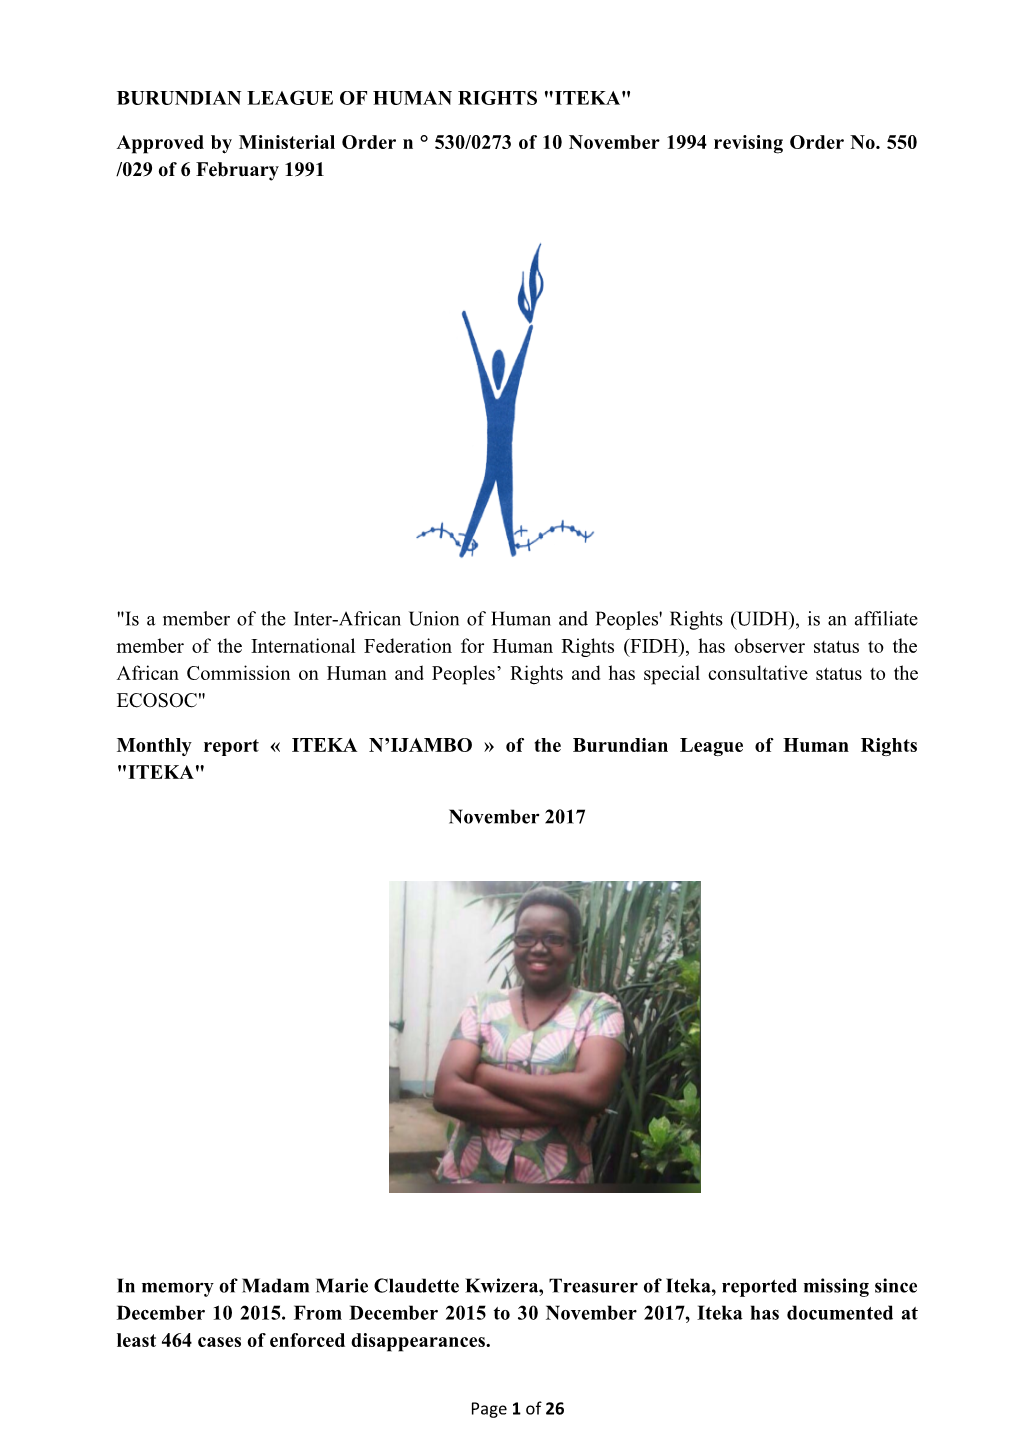 BURUNDIAN LEAGUE of HUMAN RIGHTS "ITEKA" Approved By